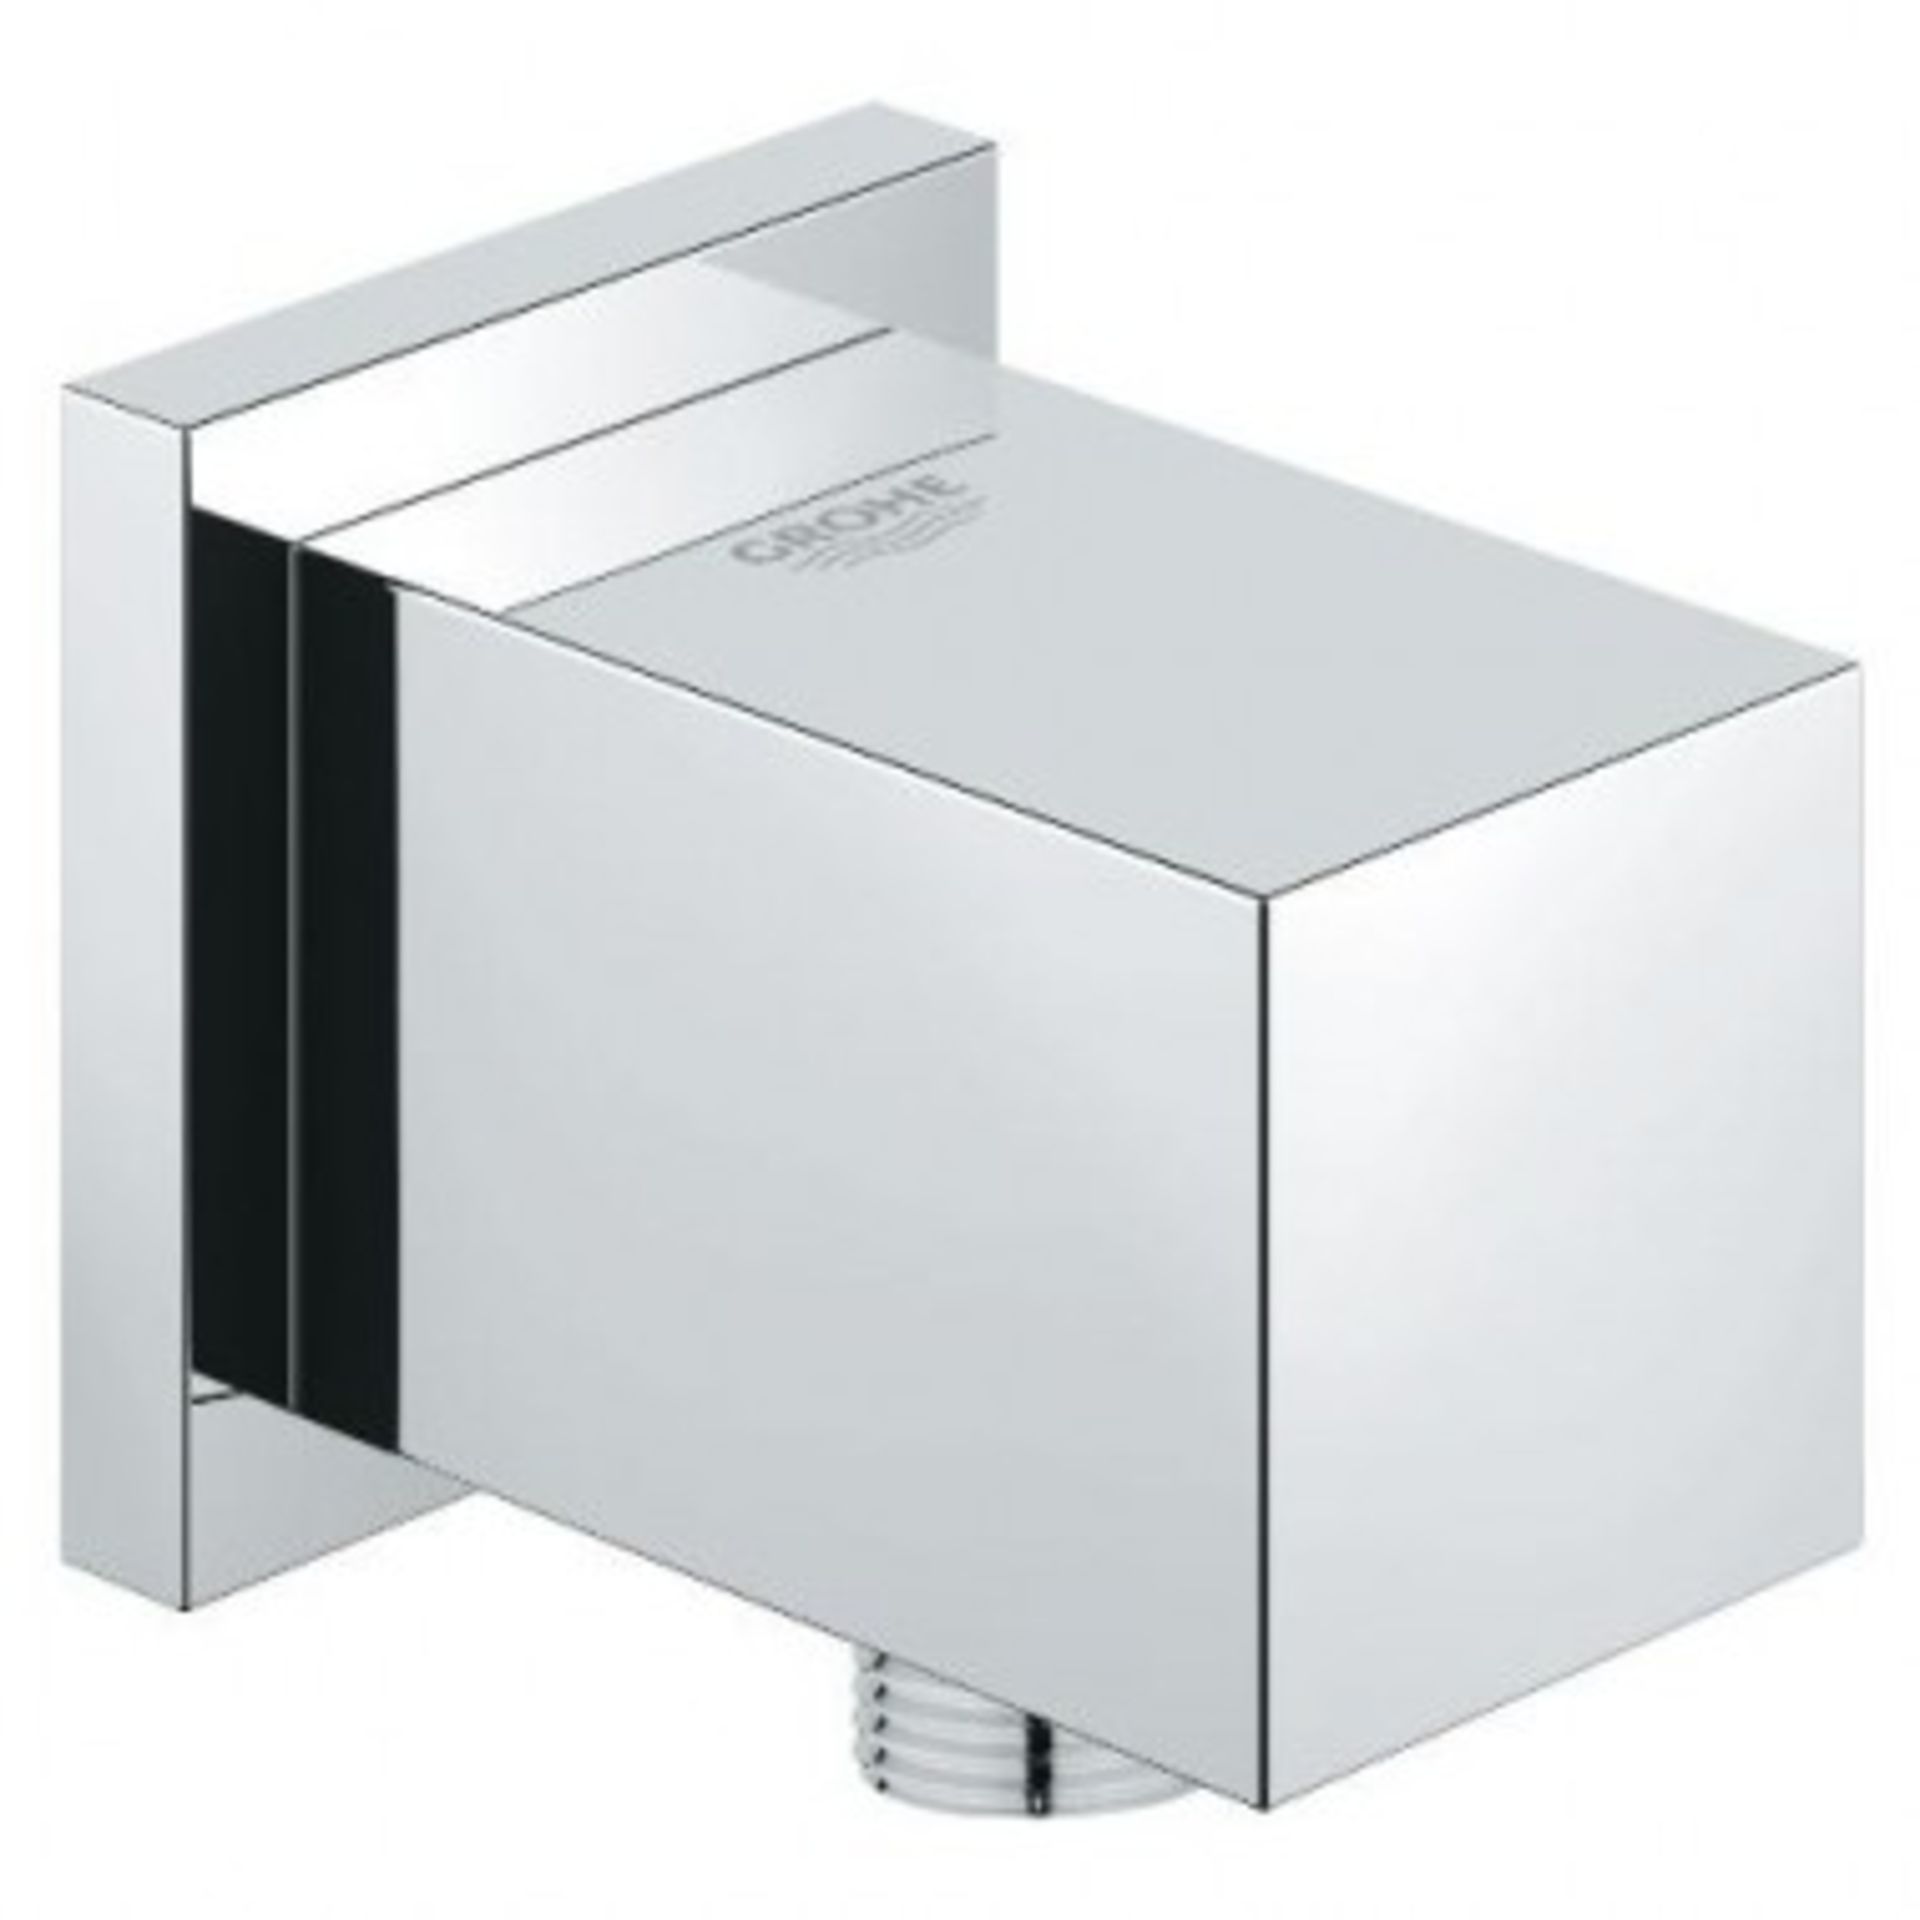 (QP160) Grohe Euphoria Cube Shower Outlet Elbow. The unique style of the GROHE Euphoria is